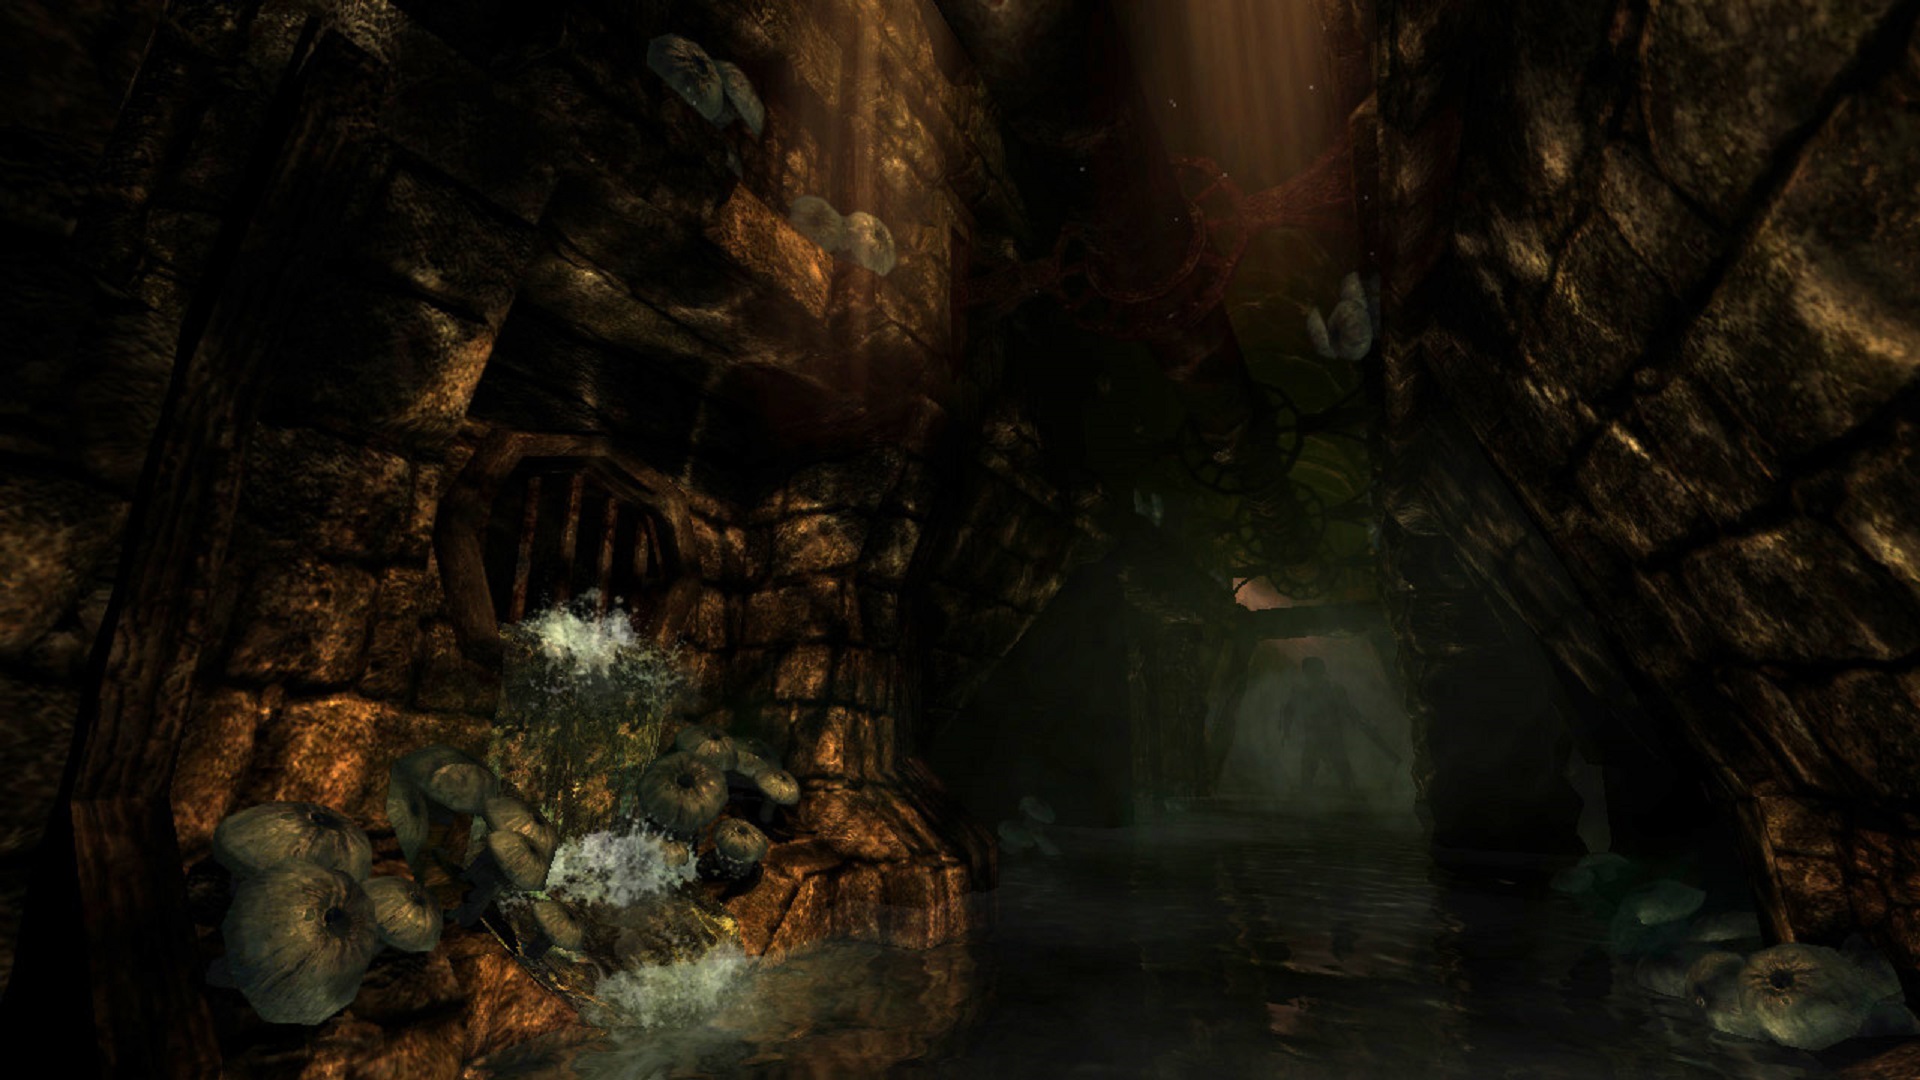 amnesia-the-dark-descent-goes-open-source-in-anticipation-of-new-game-dread-xp